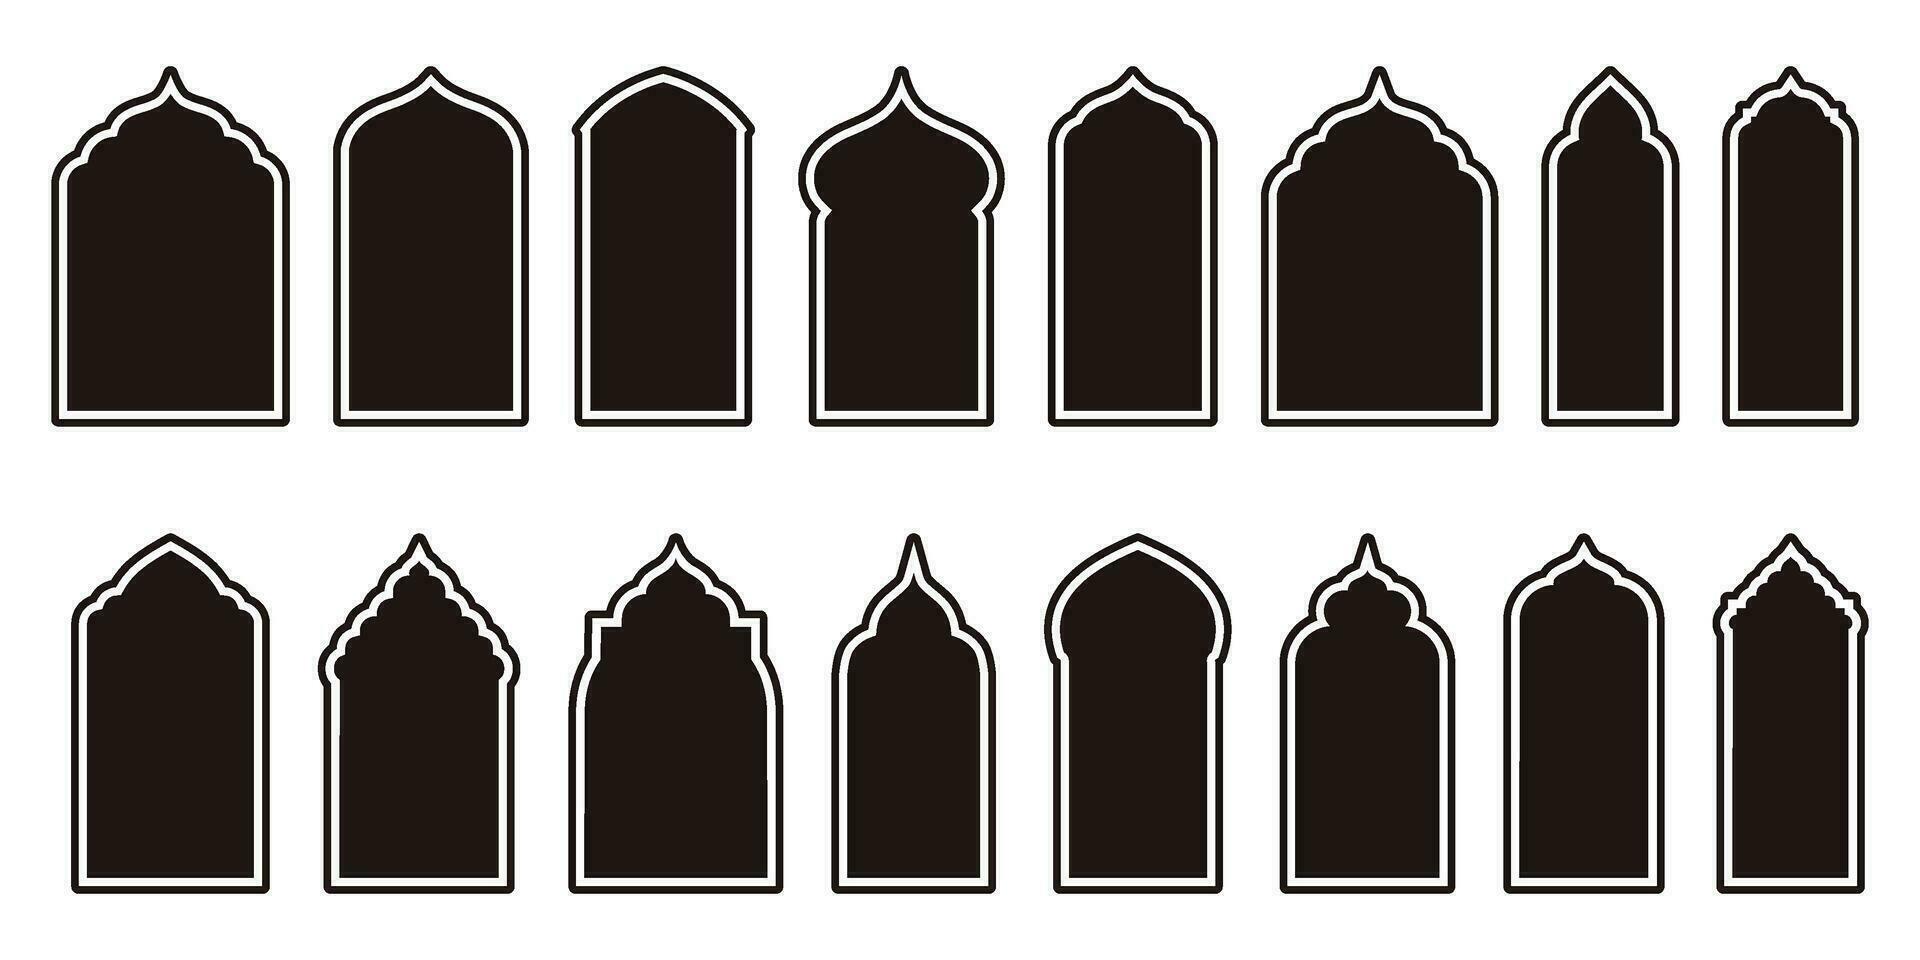 Versatile Islamic Vector Shapes Highlighting Window and Door Arches. Arab Frames Set with Ramadan Kareem Silhouette Icons. Elegant Mosque Gate Designs.